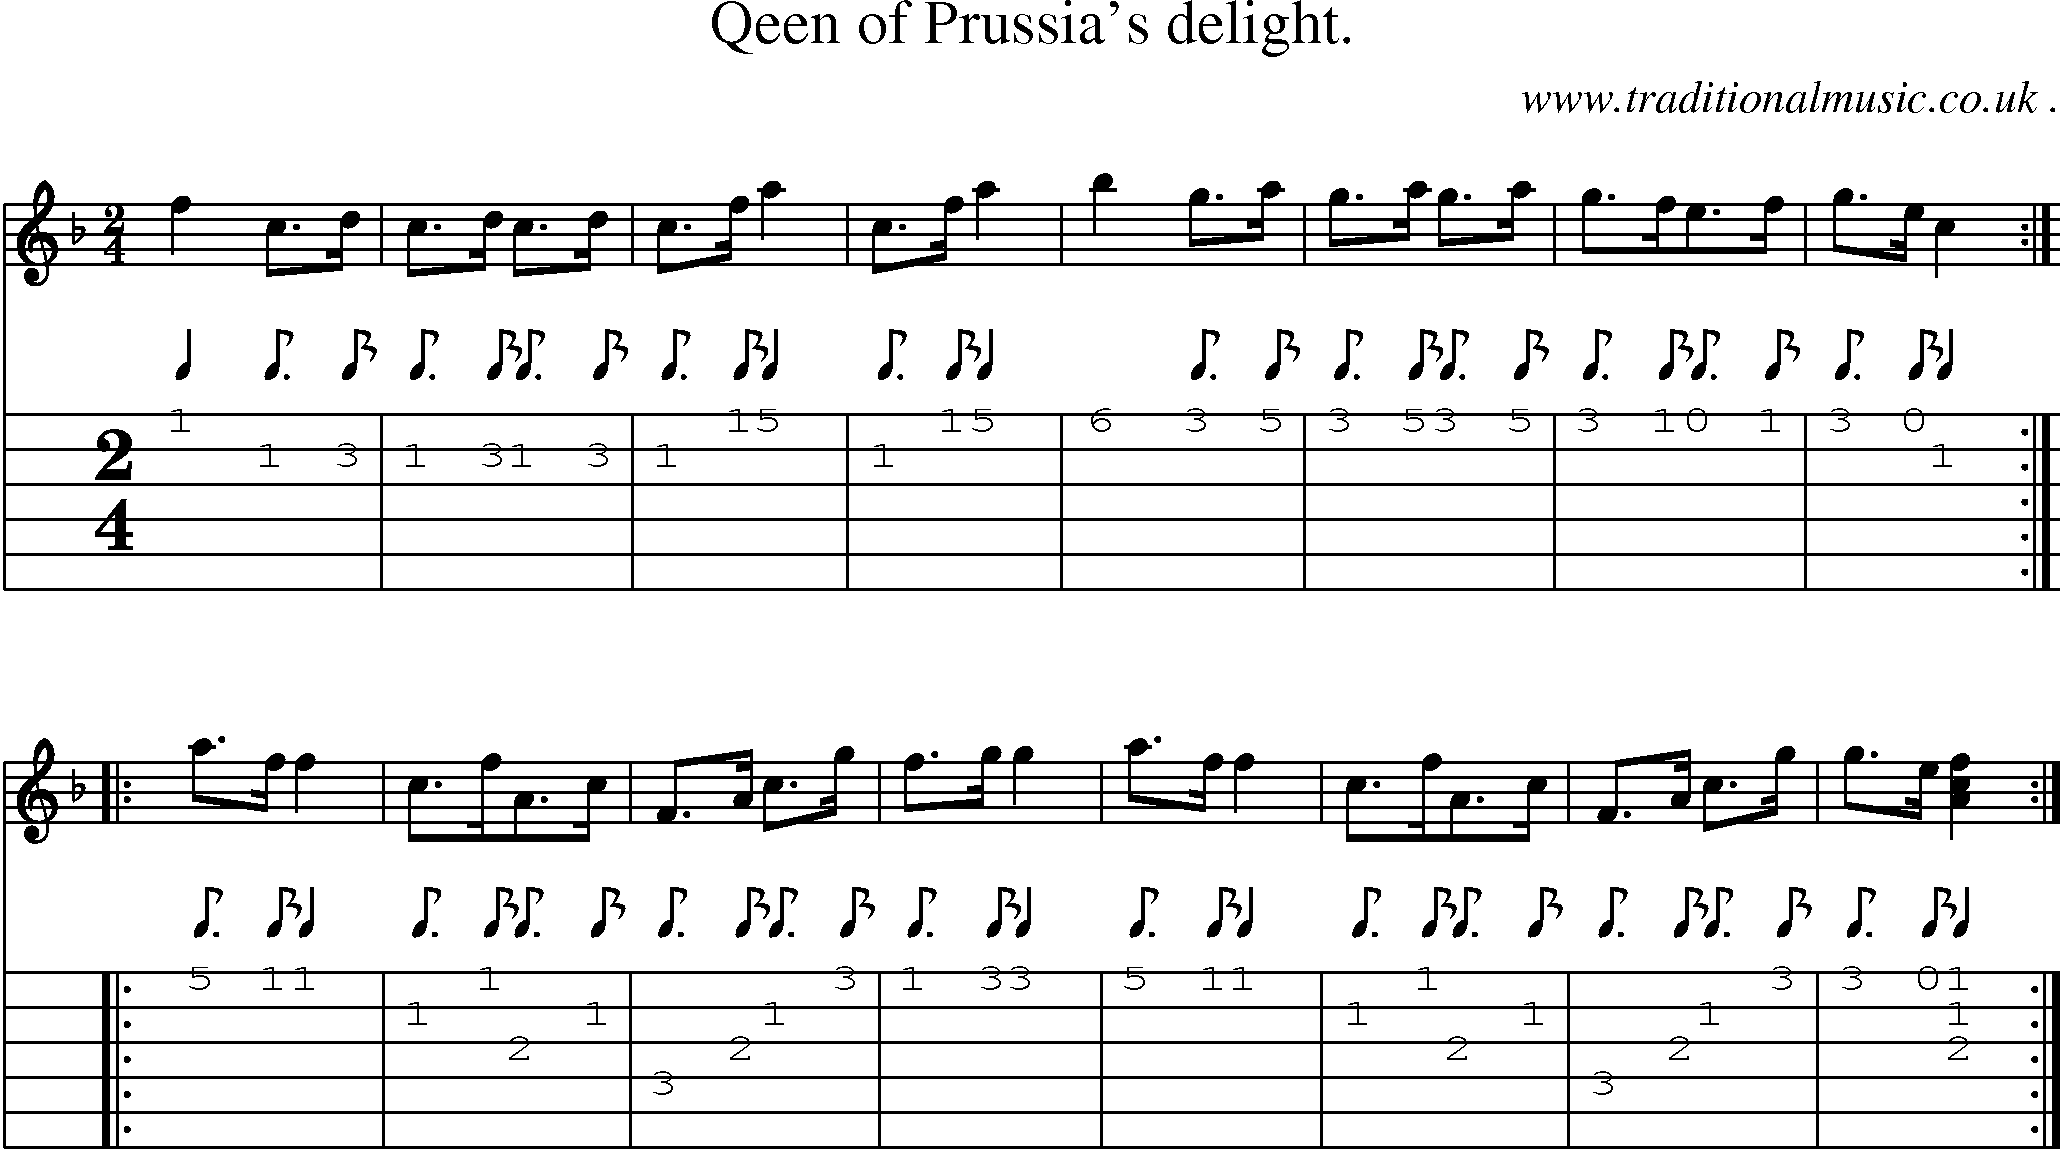 Sheet-Music and Guitar Tabs for Qeen Of Prussias Delight